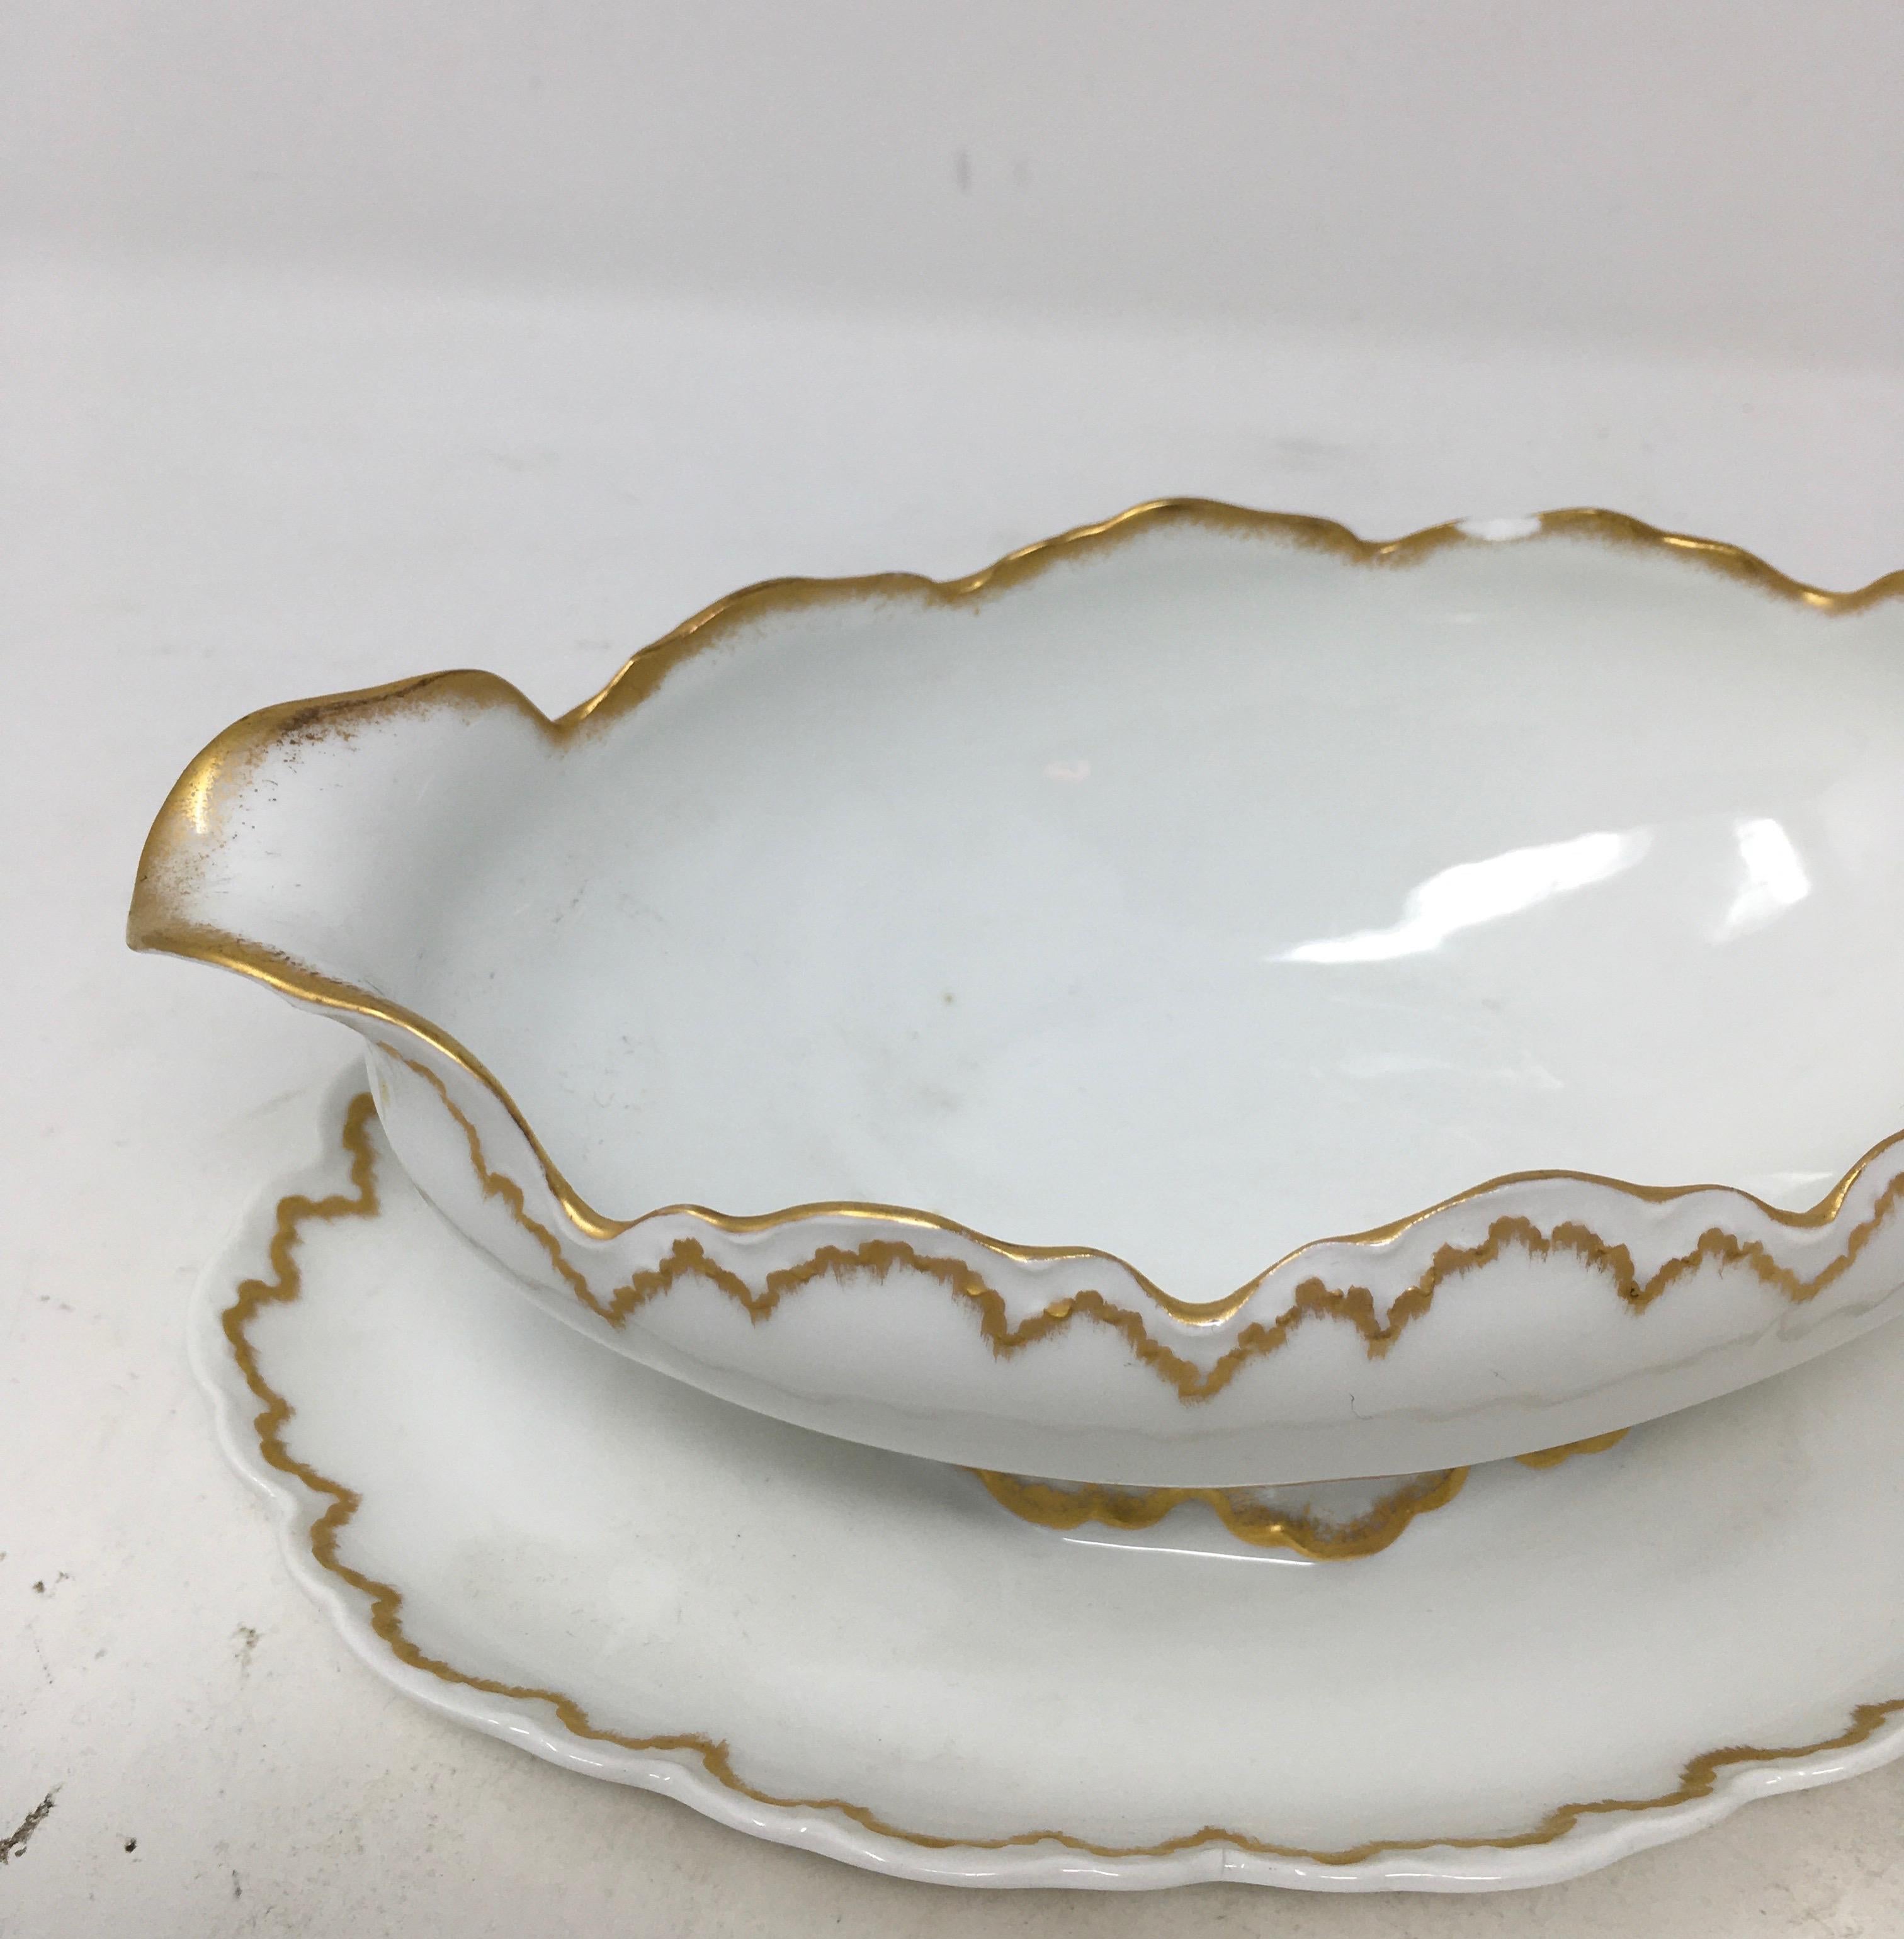 This is a lovely gravy or sauce with a gold scalloped edge and attached plate. The piece is marked on the bottom with the Rosenthal hallmark, Malmaison, Bavaria. A lovely piece for your entertaining needs.

This piece weighs 1 lb.
   